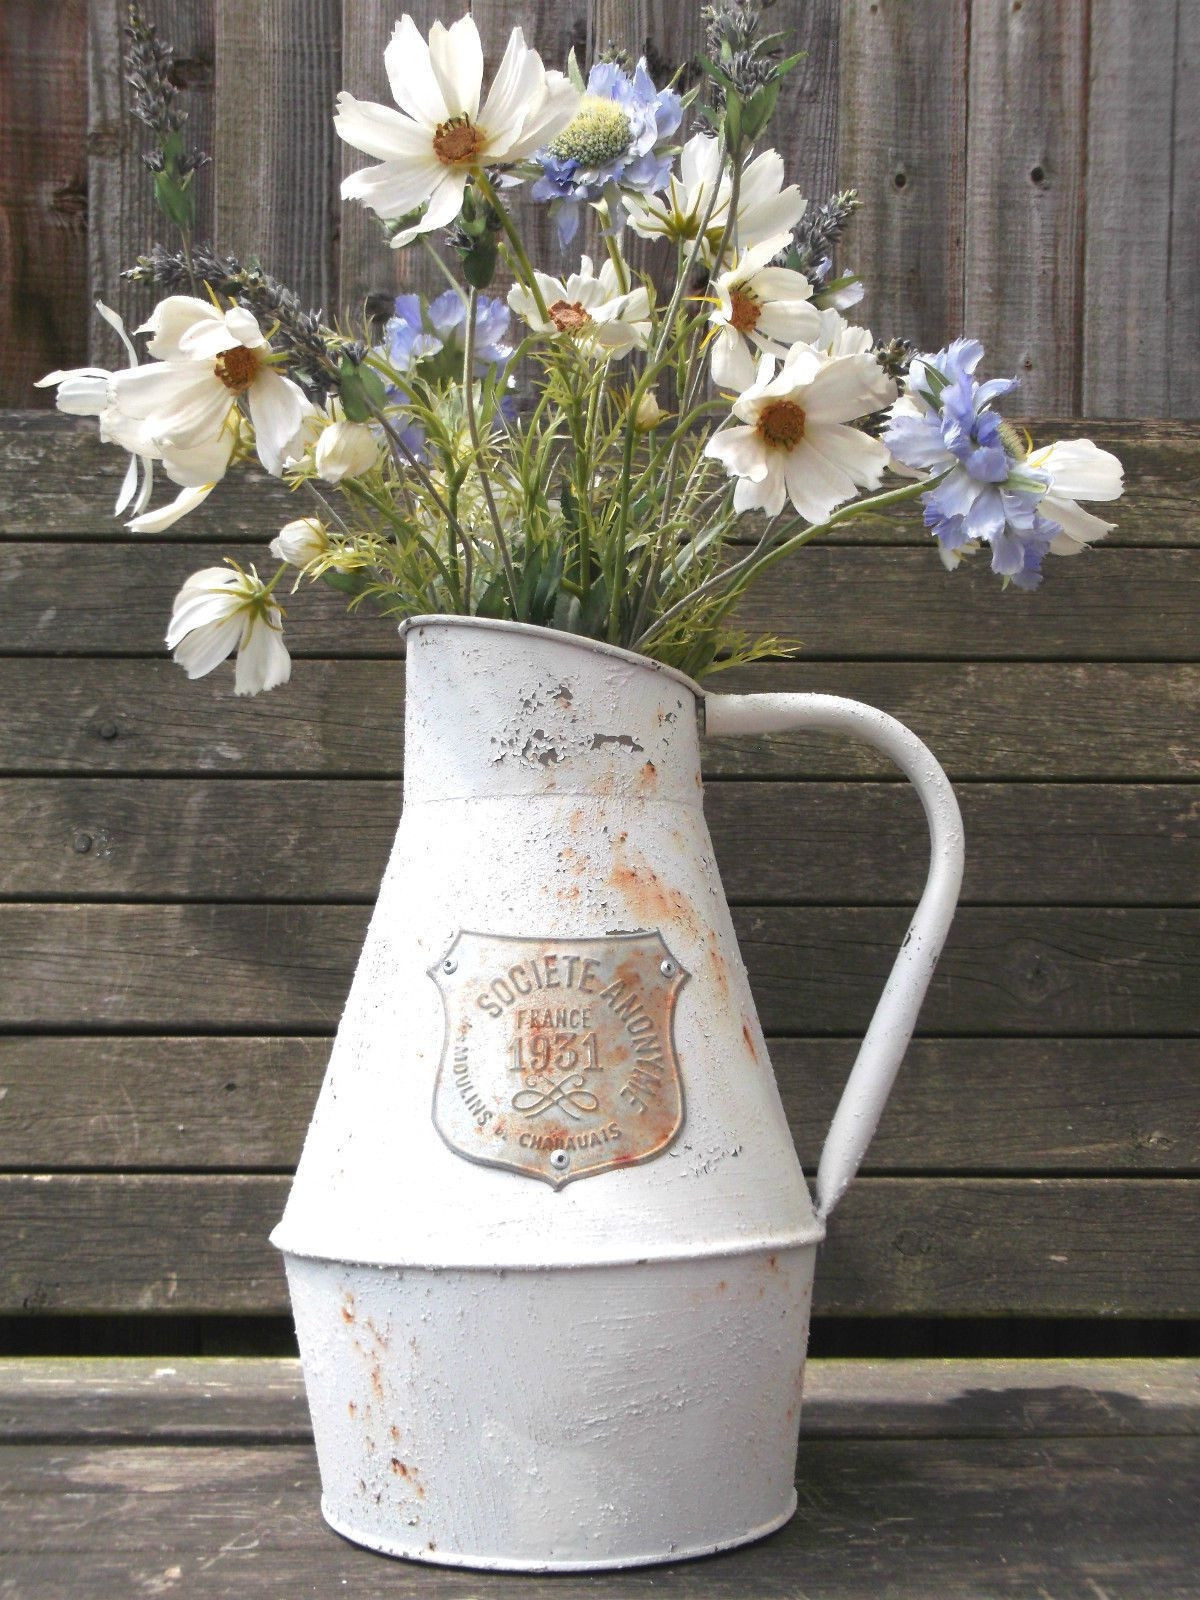 19 attractive Wall Pocket Vase 2023 free download wall pocket vase of galvanized flower vases www topsimages com throughout french country vases stock french flower bucket vases galvanized french vase tin bucketi of french country